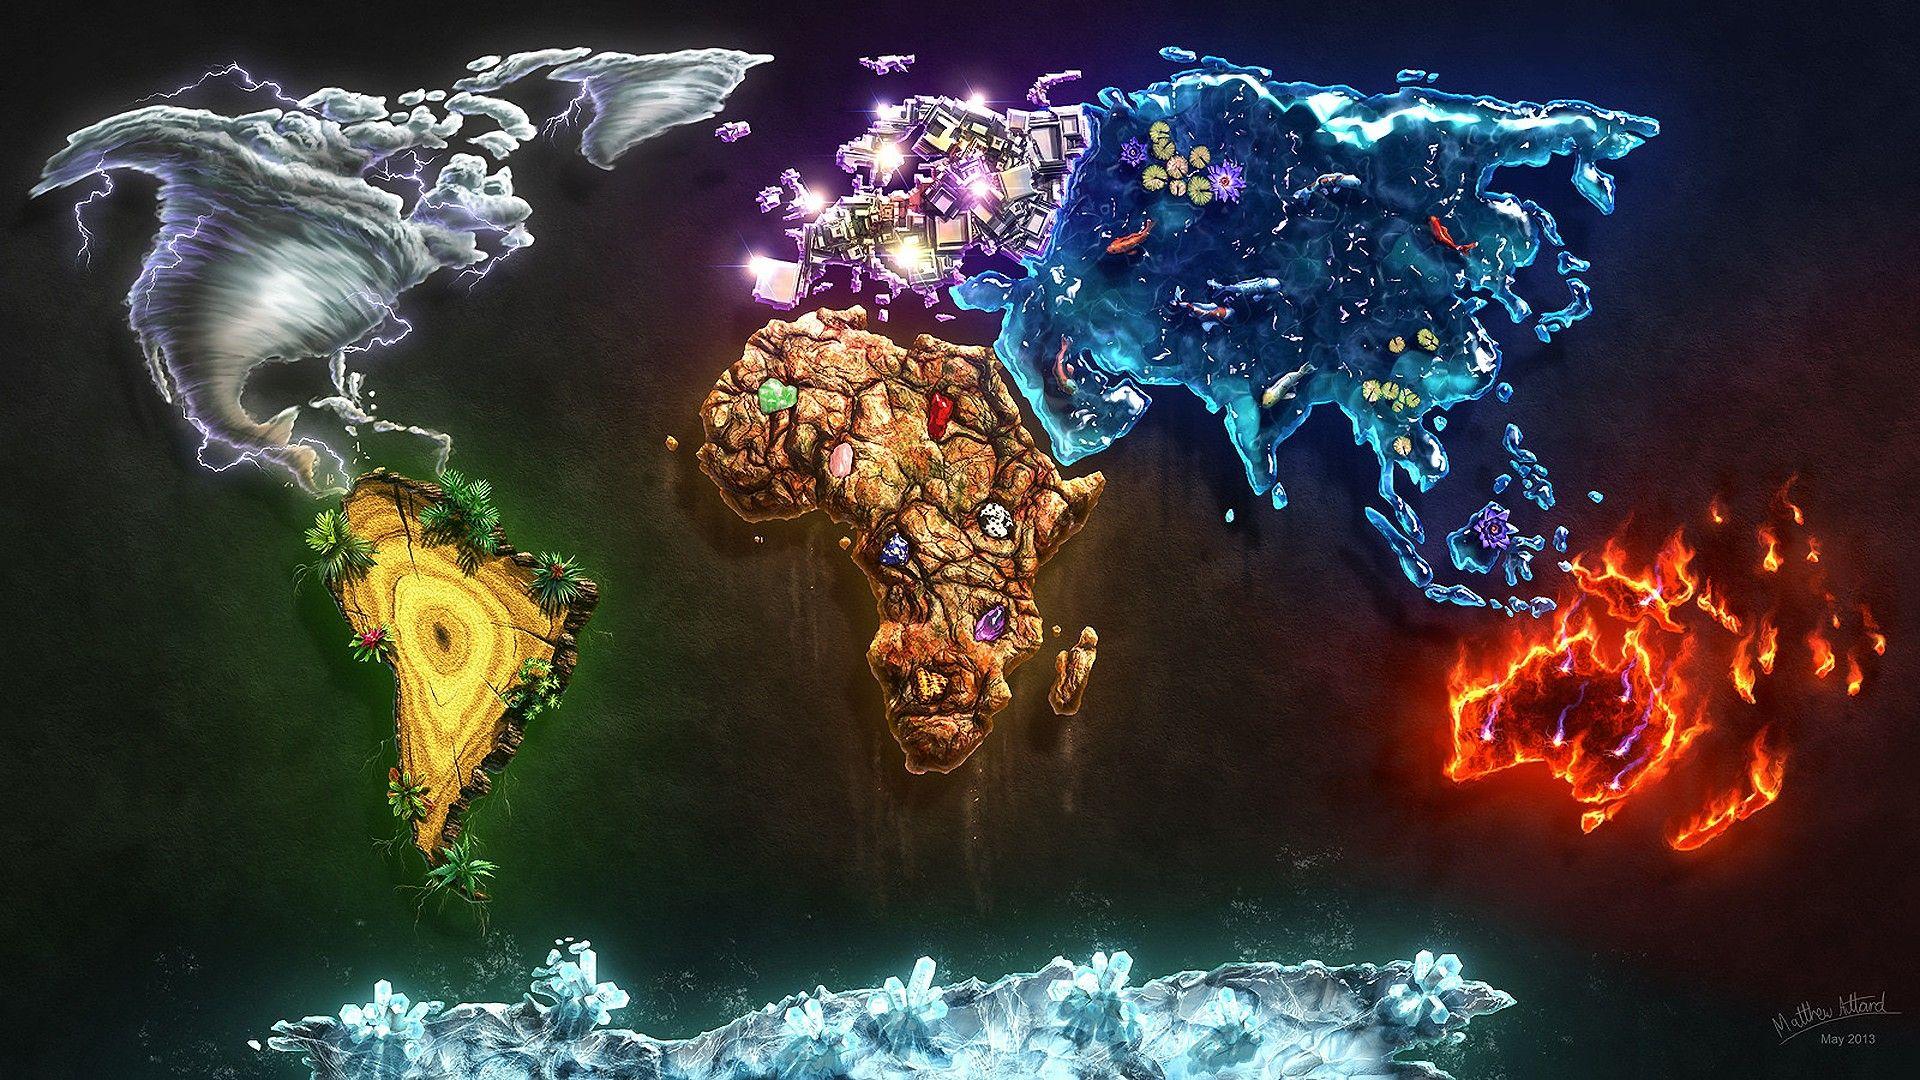 Wallpaper, 1920x1080 px, air, continents, diamonds, Earth, fire, four elements, ice, map, tornado, water, world 1920x1080